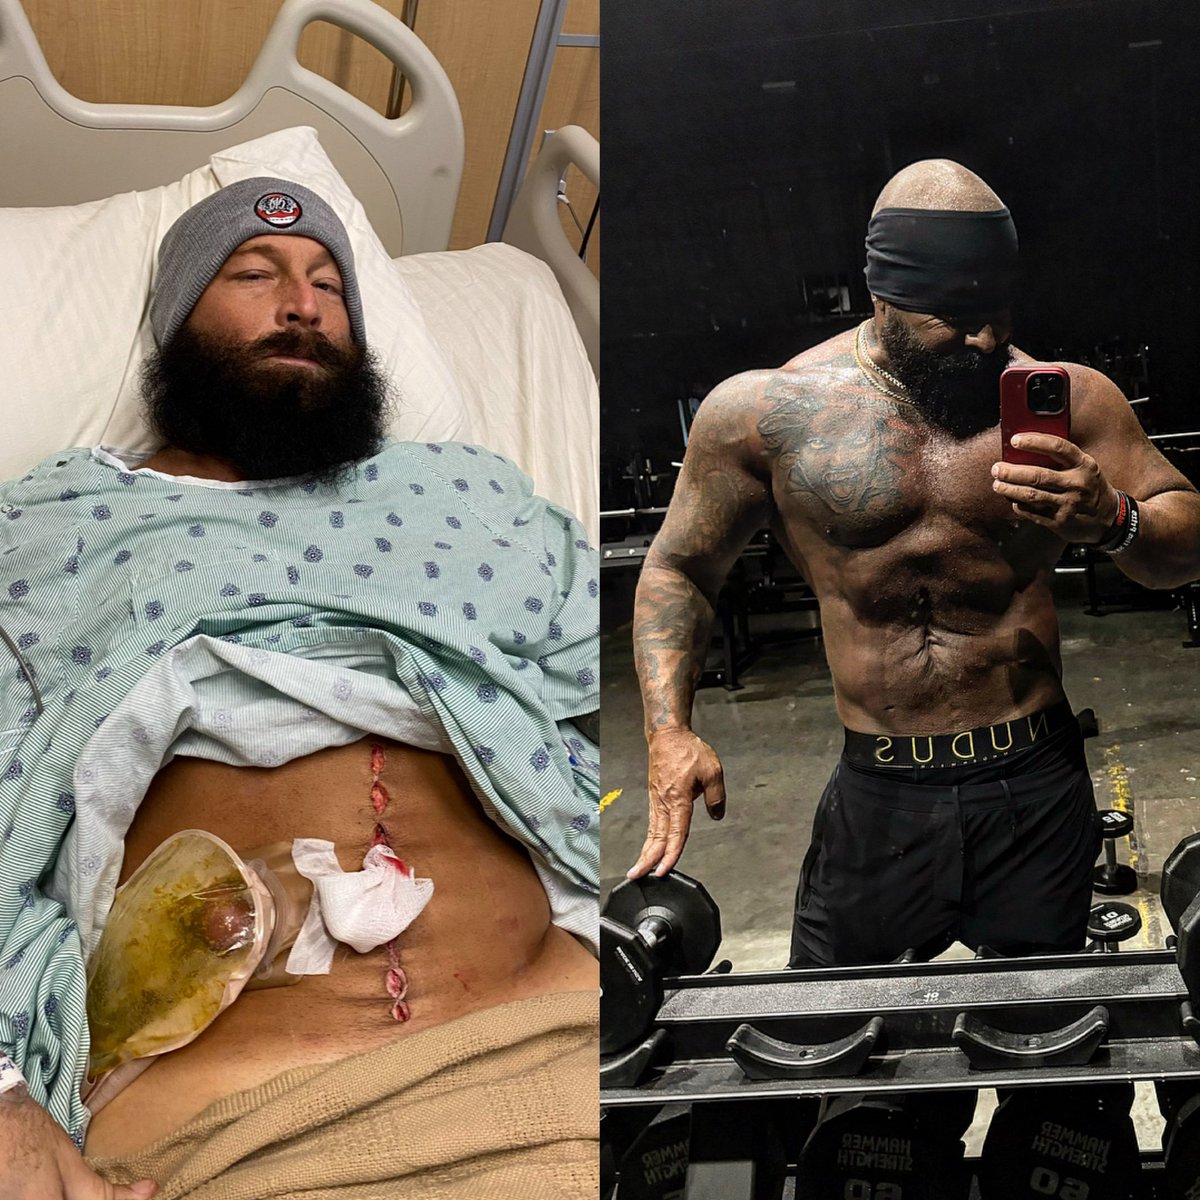 @KennyOmegamanX if you happen to see this.... This is a Total Colectomy / J Pouch 3 years in between photos and 5 total surgeries, but it's possible to come back and do what you love. @AEW